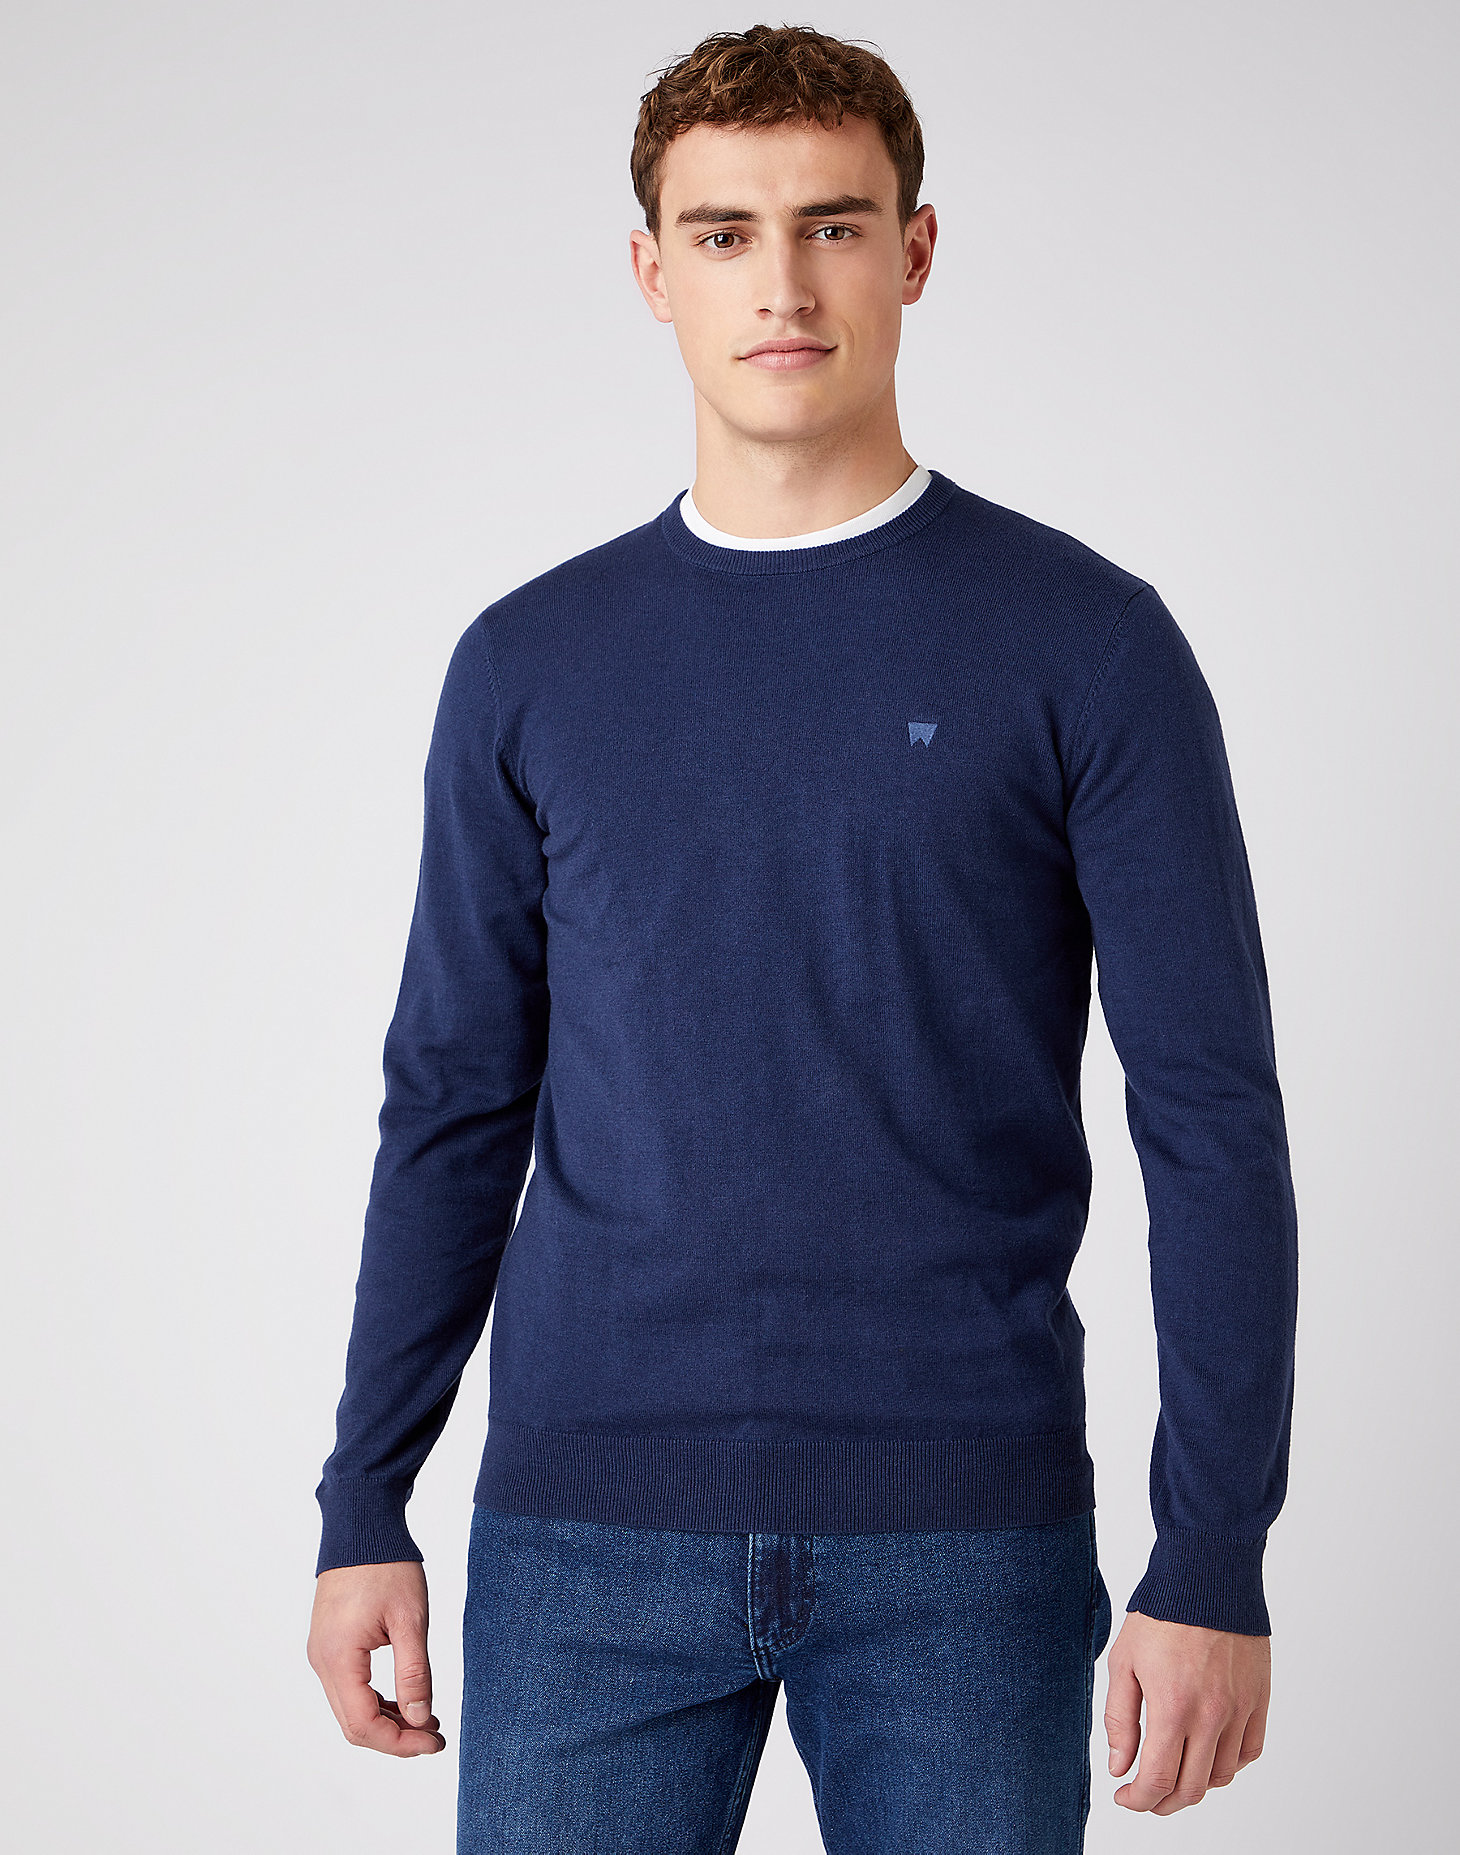 Crewneck Knit in Navy main view